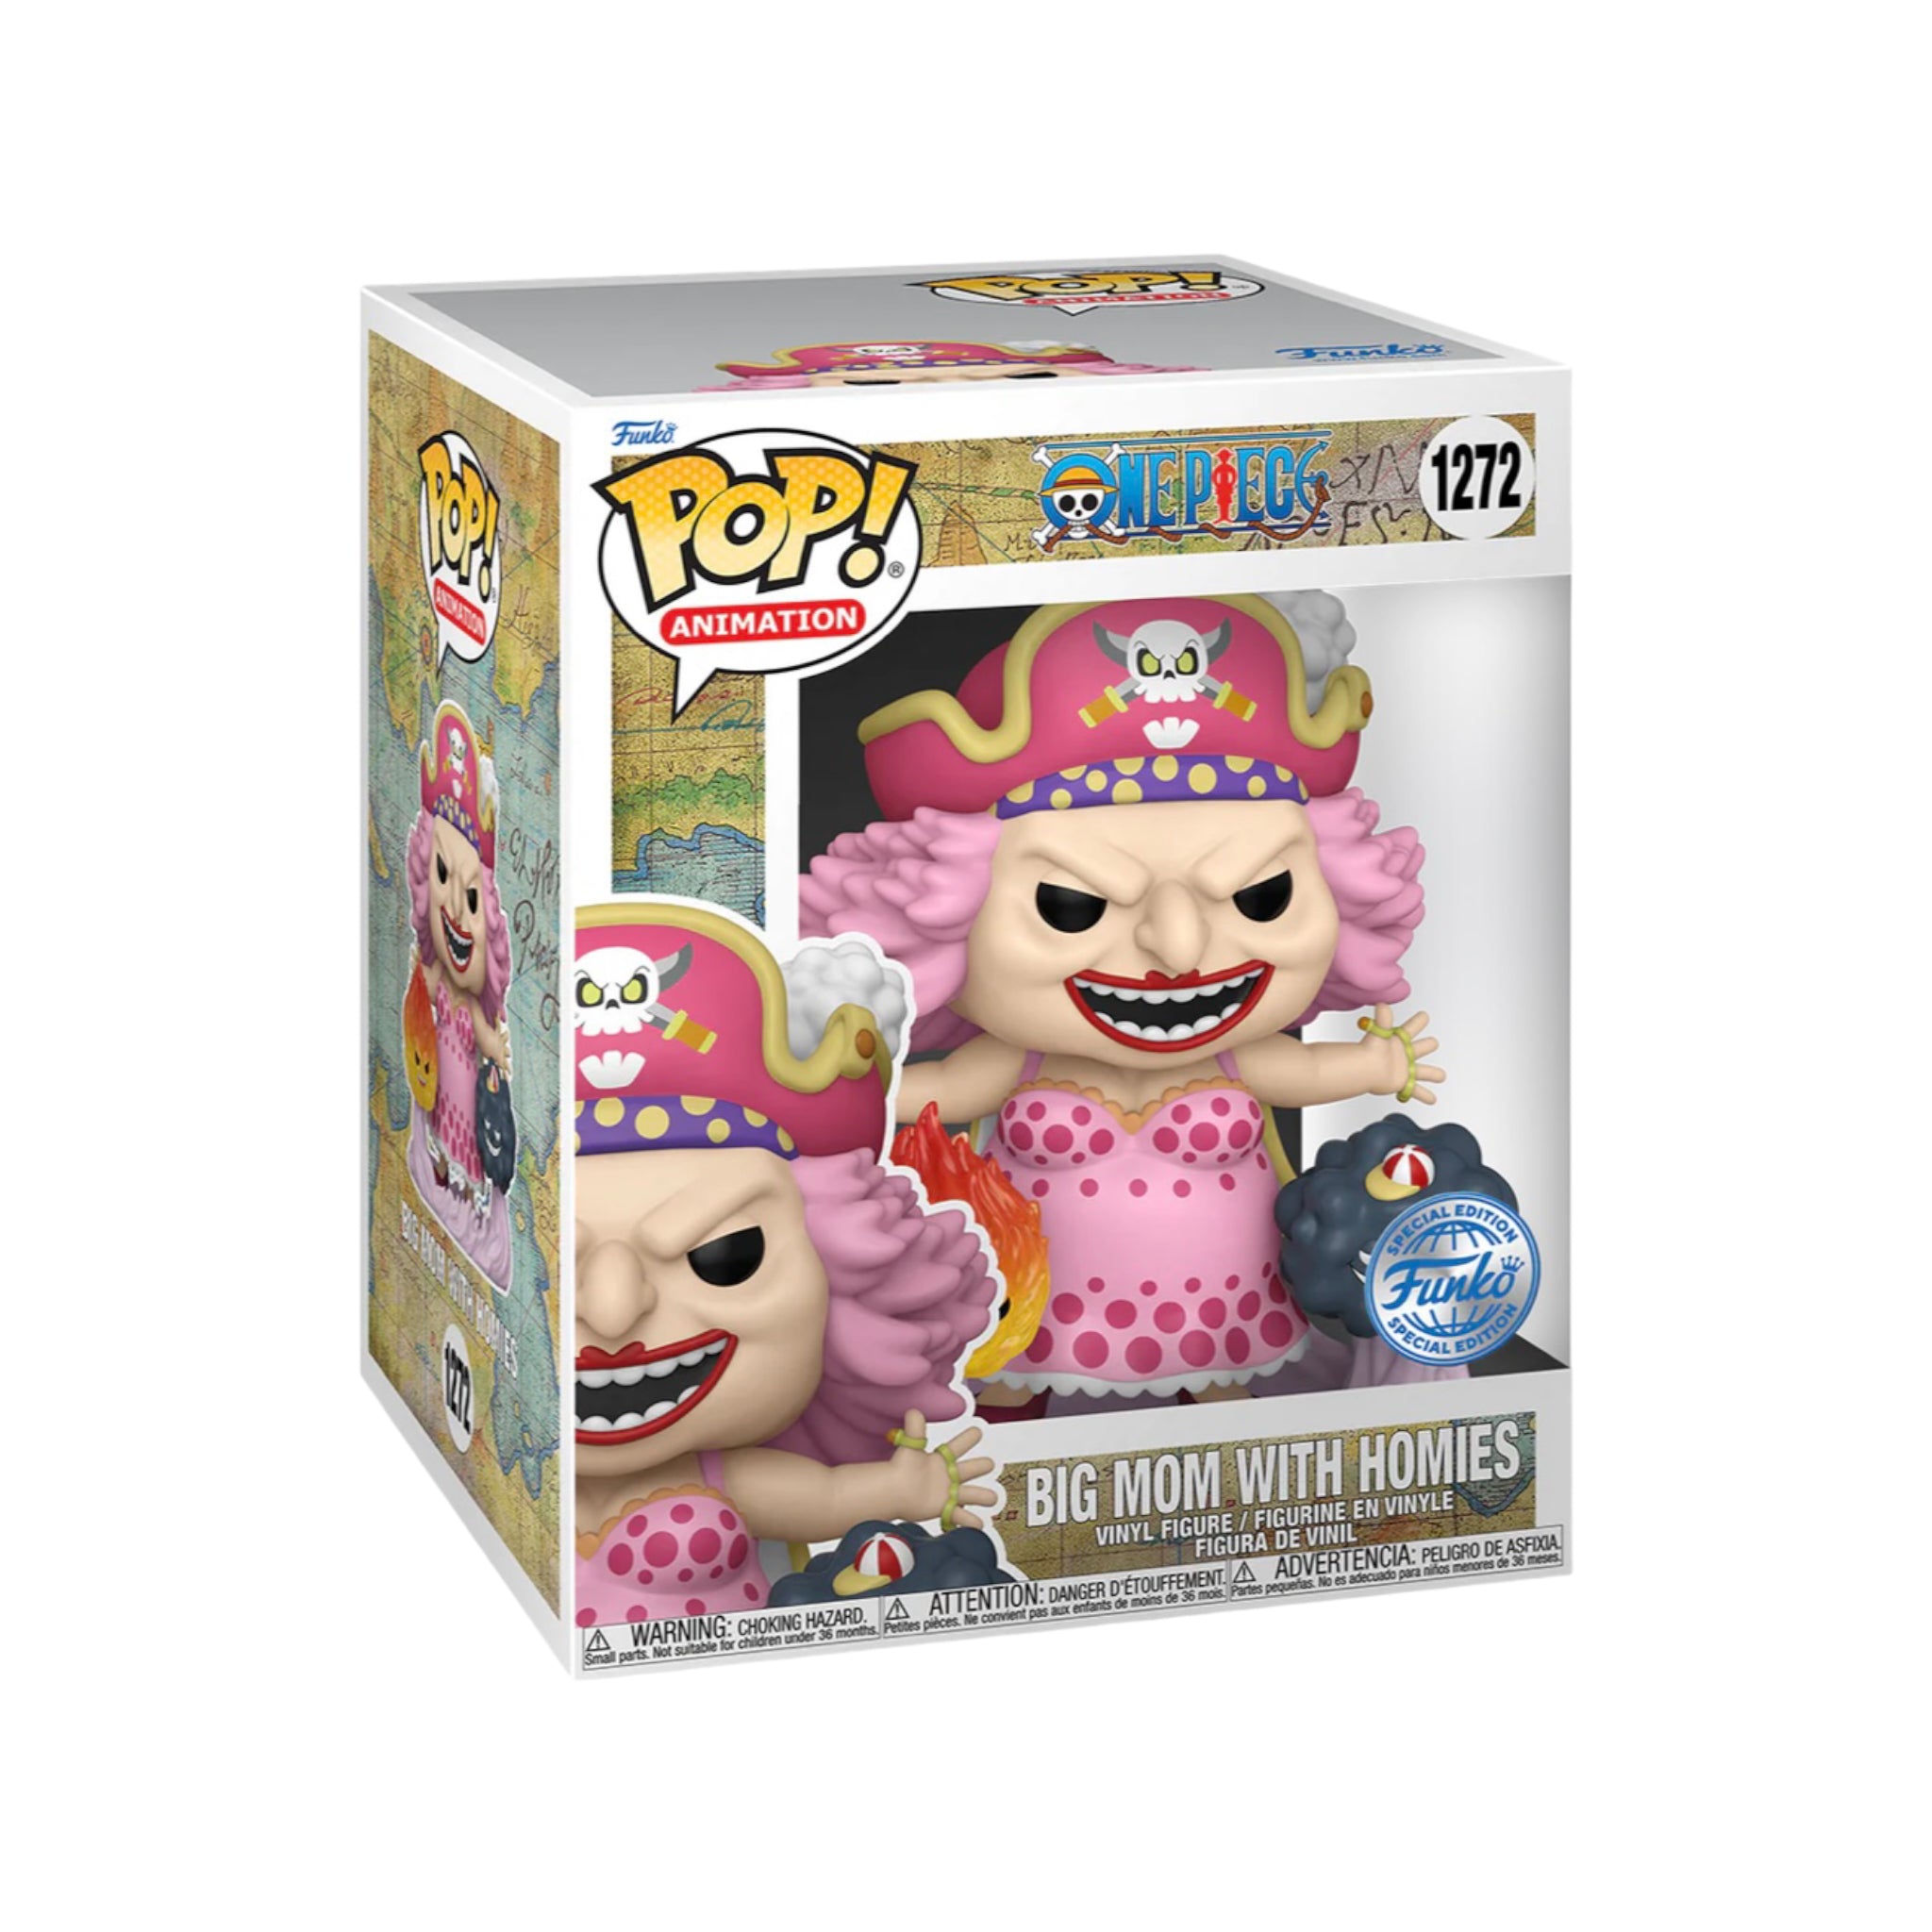 Big Mom with Homies #1272 6" Funko Pop! - One Piece - Special Edition